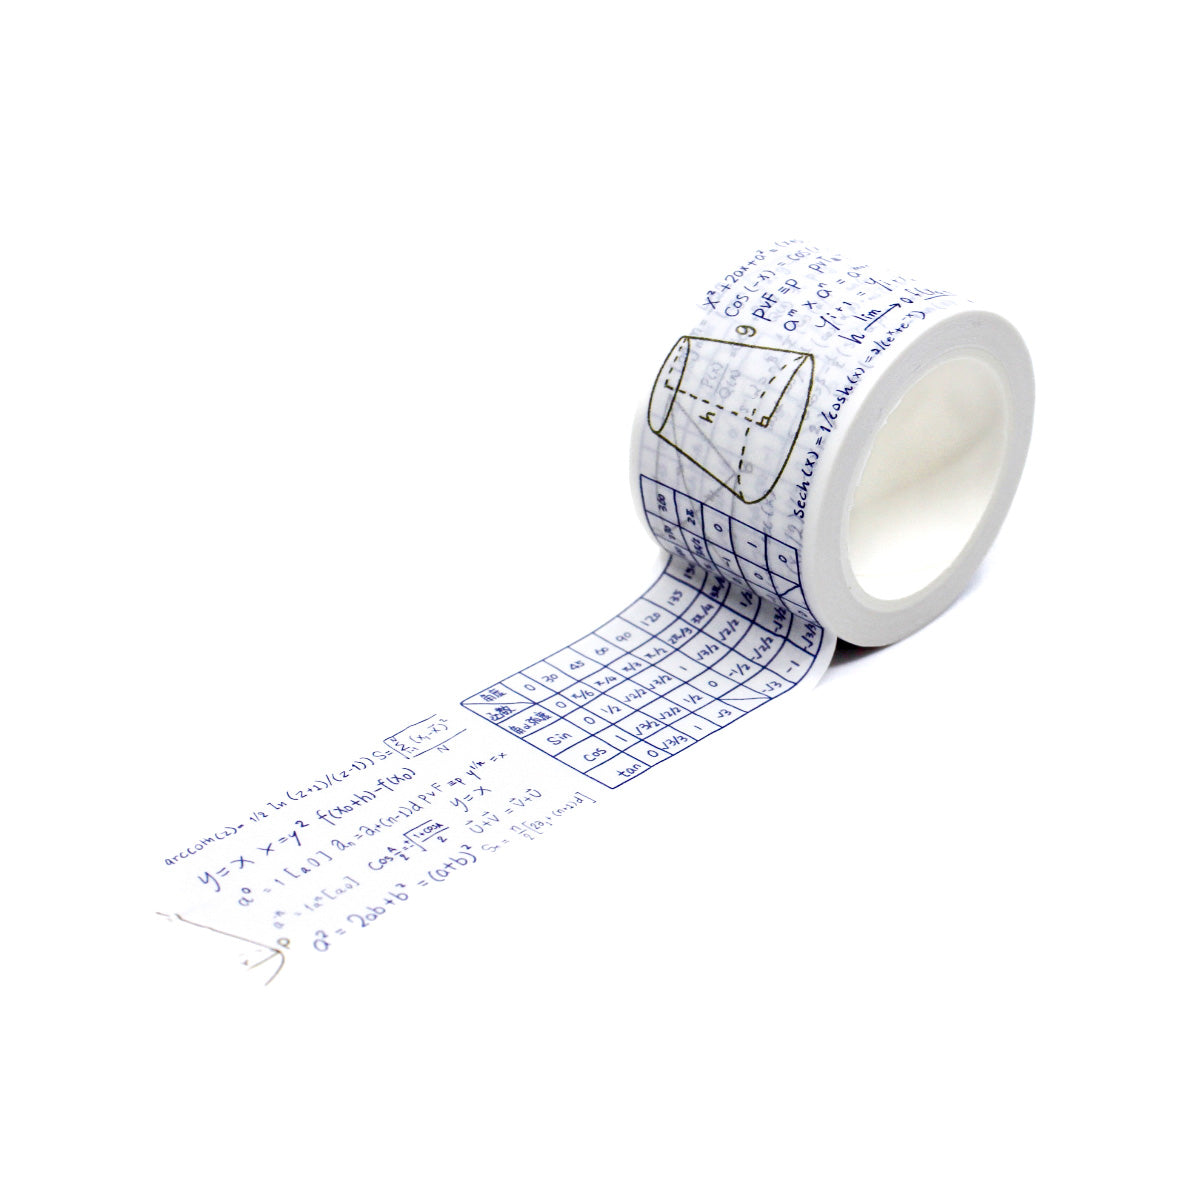 Mathematics, Chemistry, and Geometry Washi Tape set, a creative blend of symbols, formulas, and geometric shapes perfect for science, math, or academic-themed projects. This tape is sold at BBB Supplies Craft Shop.